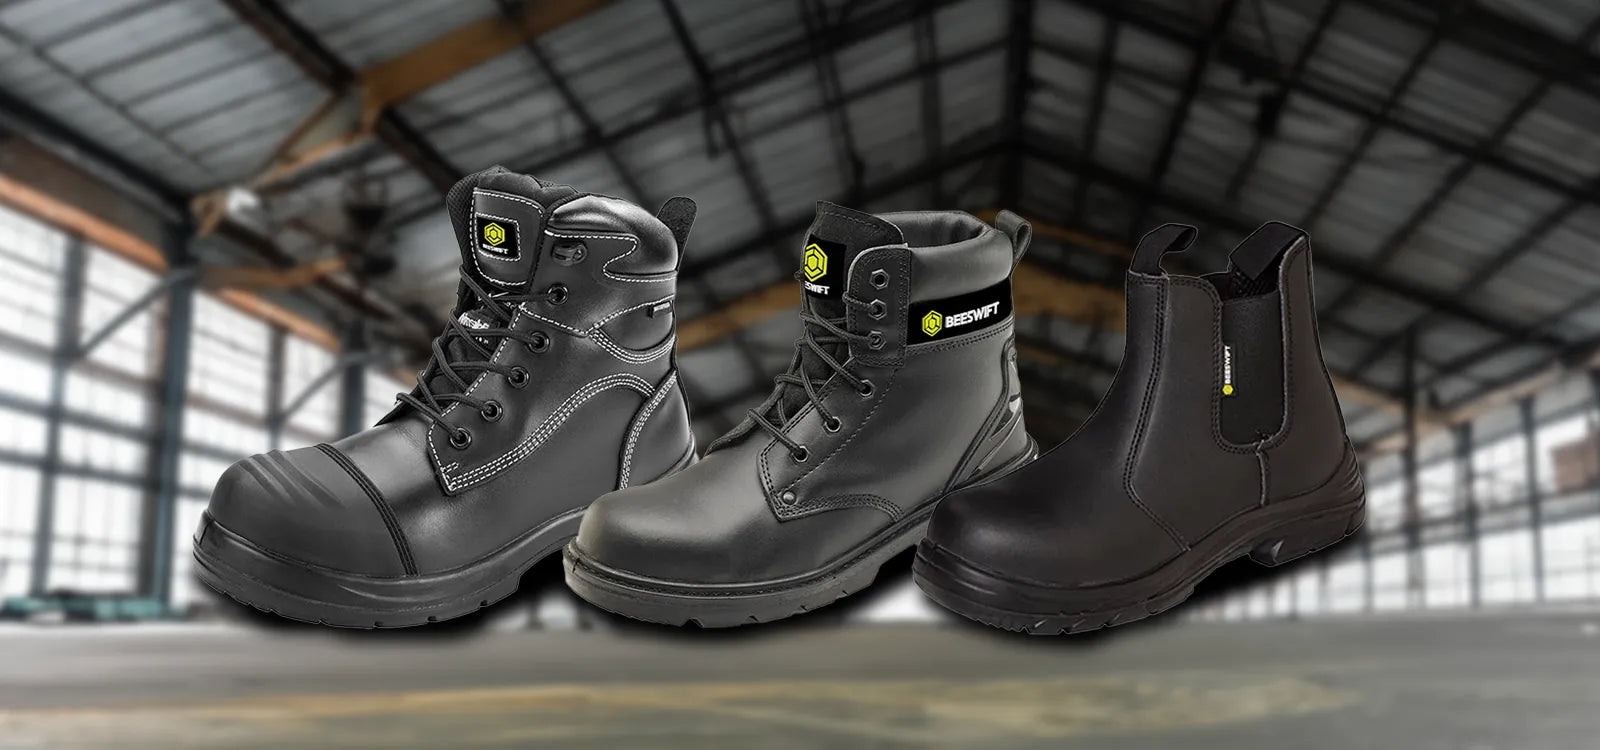 Protective Workwear Direct - Full range of Safety Boots Footwear available